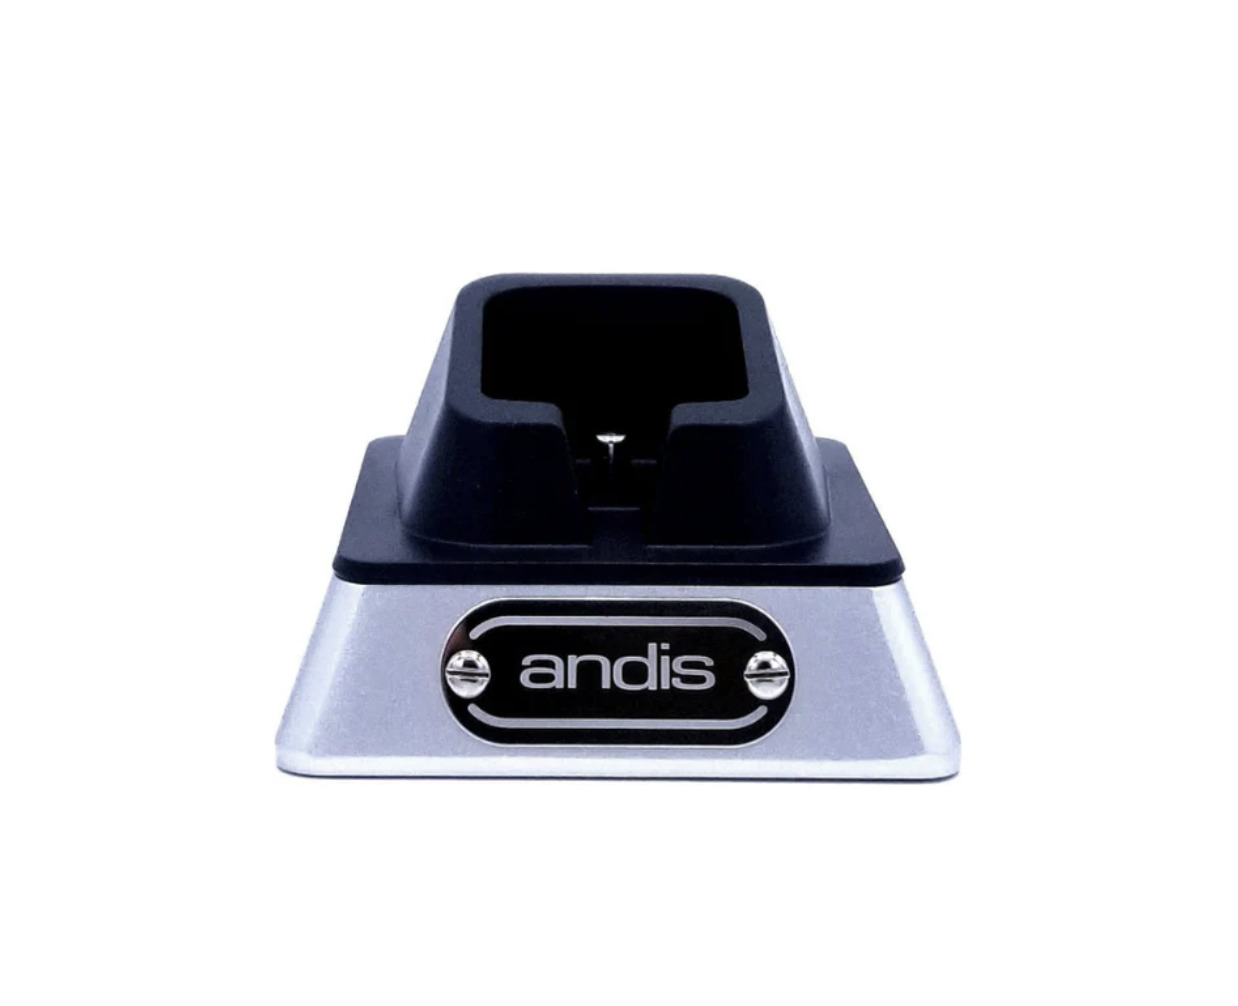 Andis Cordless Master (Silver Cordless) Replacement Charging Stand #74065